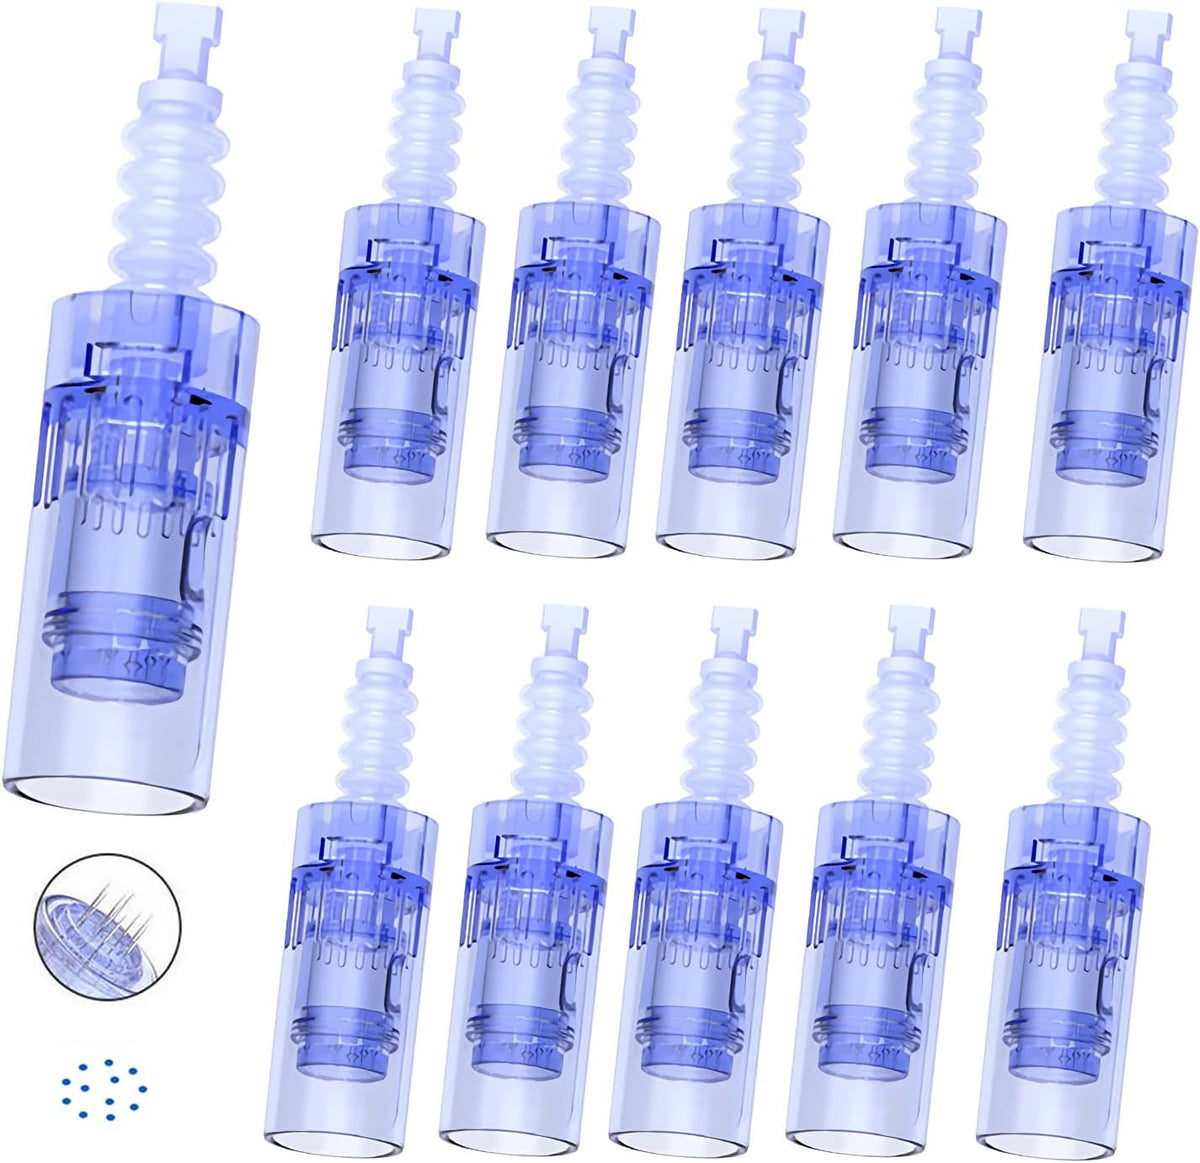 Dr.pen A6 12Pin Microneedling Pen Needle Cartridges Replacement